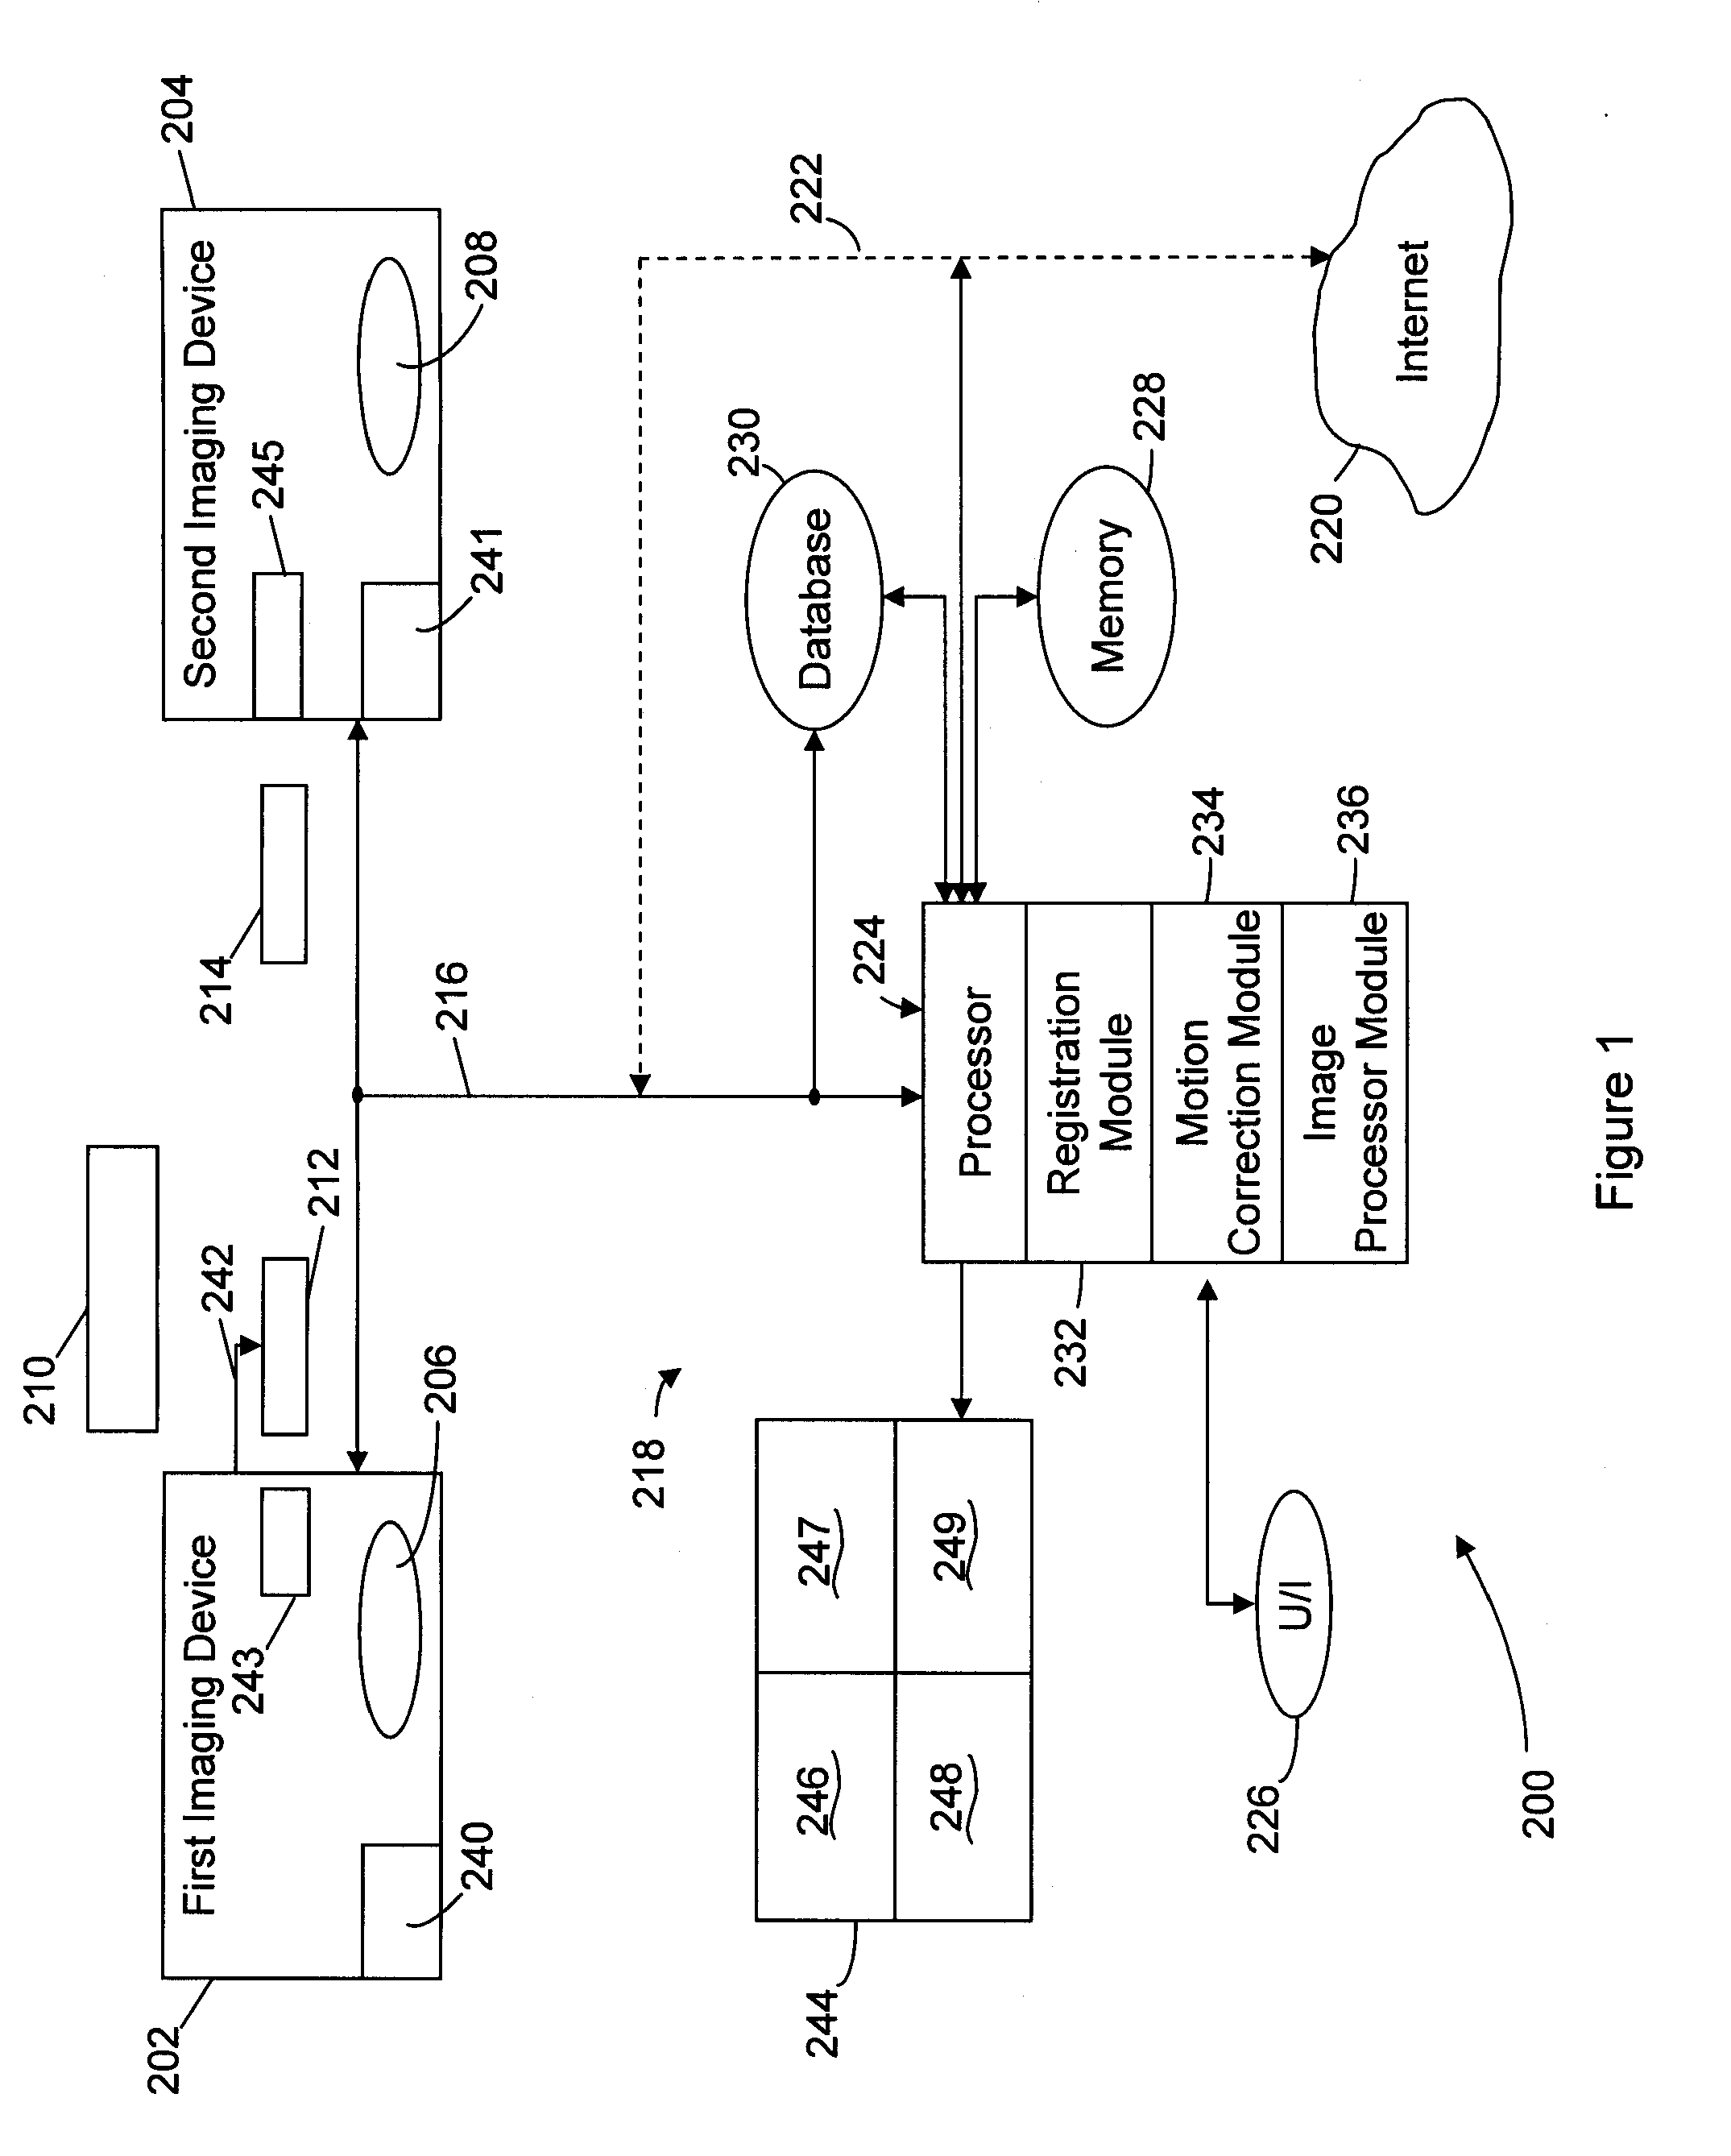 Method & system for multi-modality imaging of sequentially obtained pseudo-steady state data